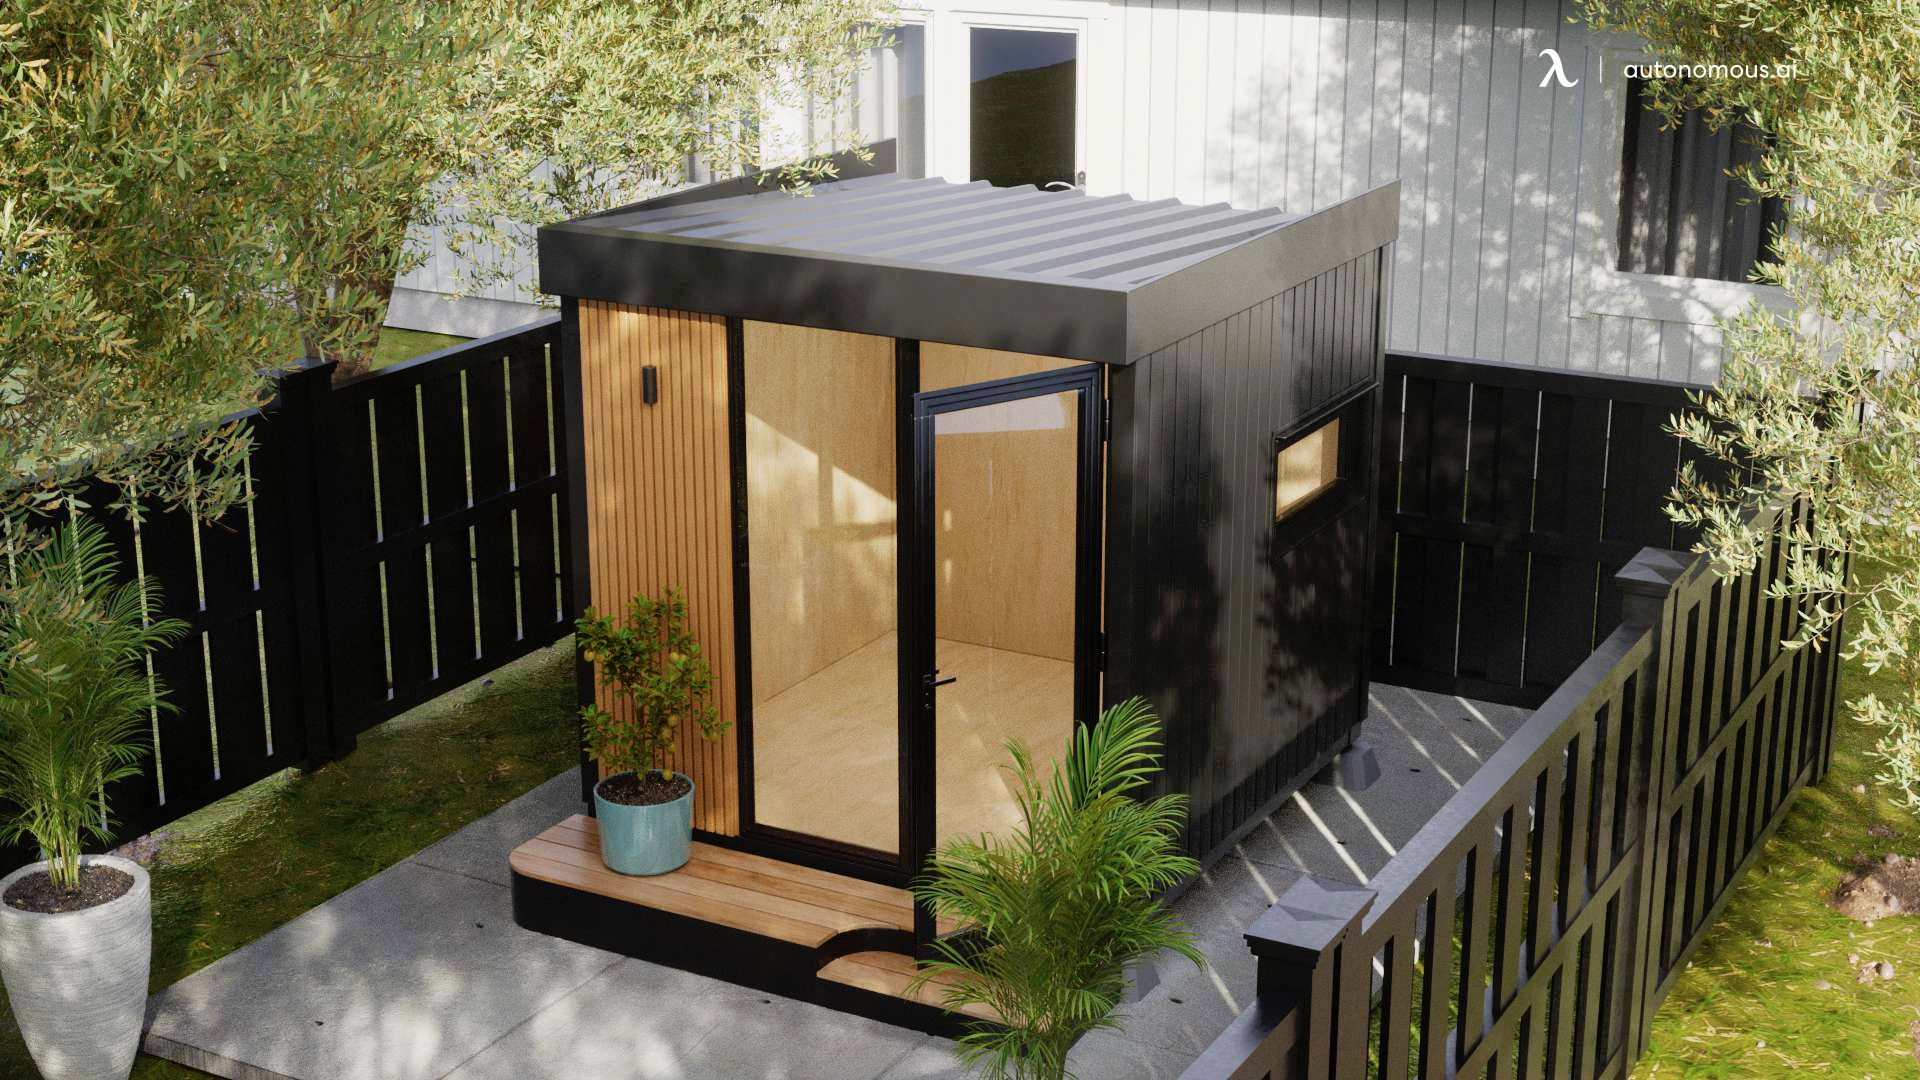 Security - are tiny houses safe